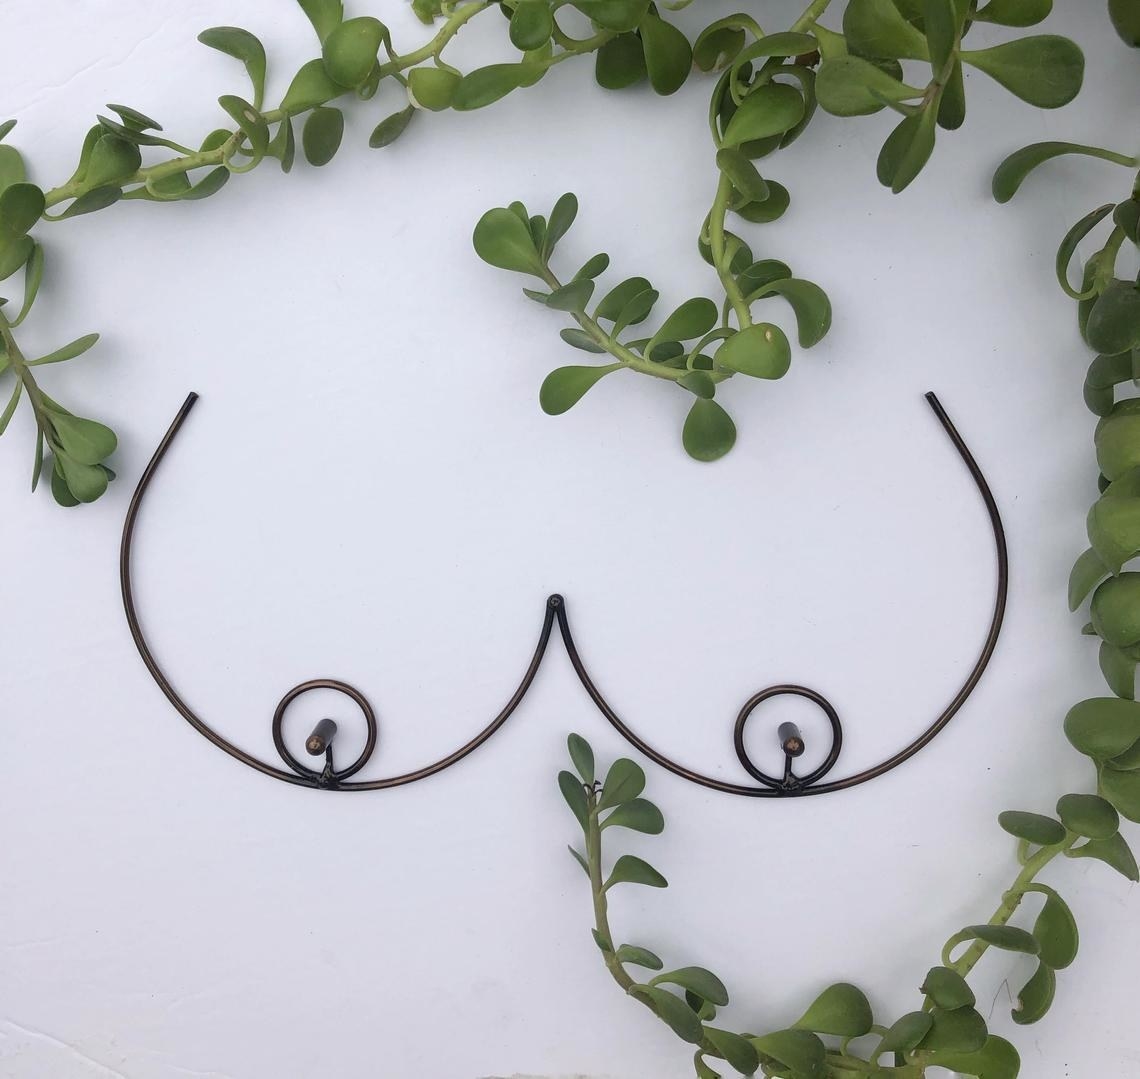 The breast hanger surrounded by vines